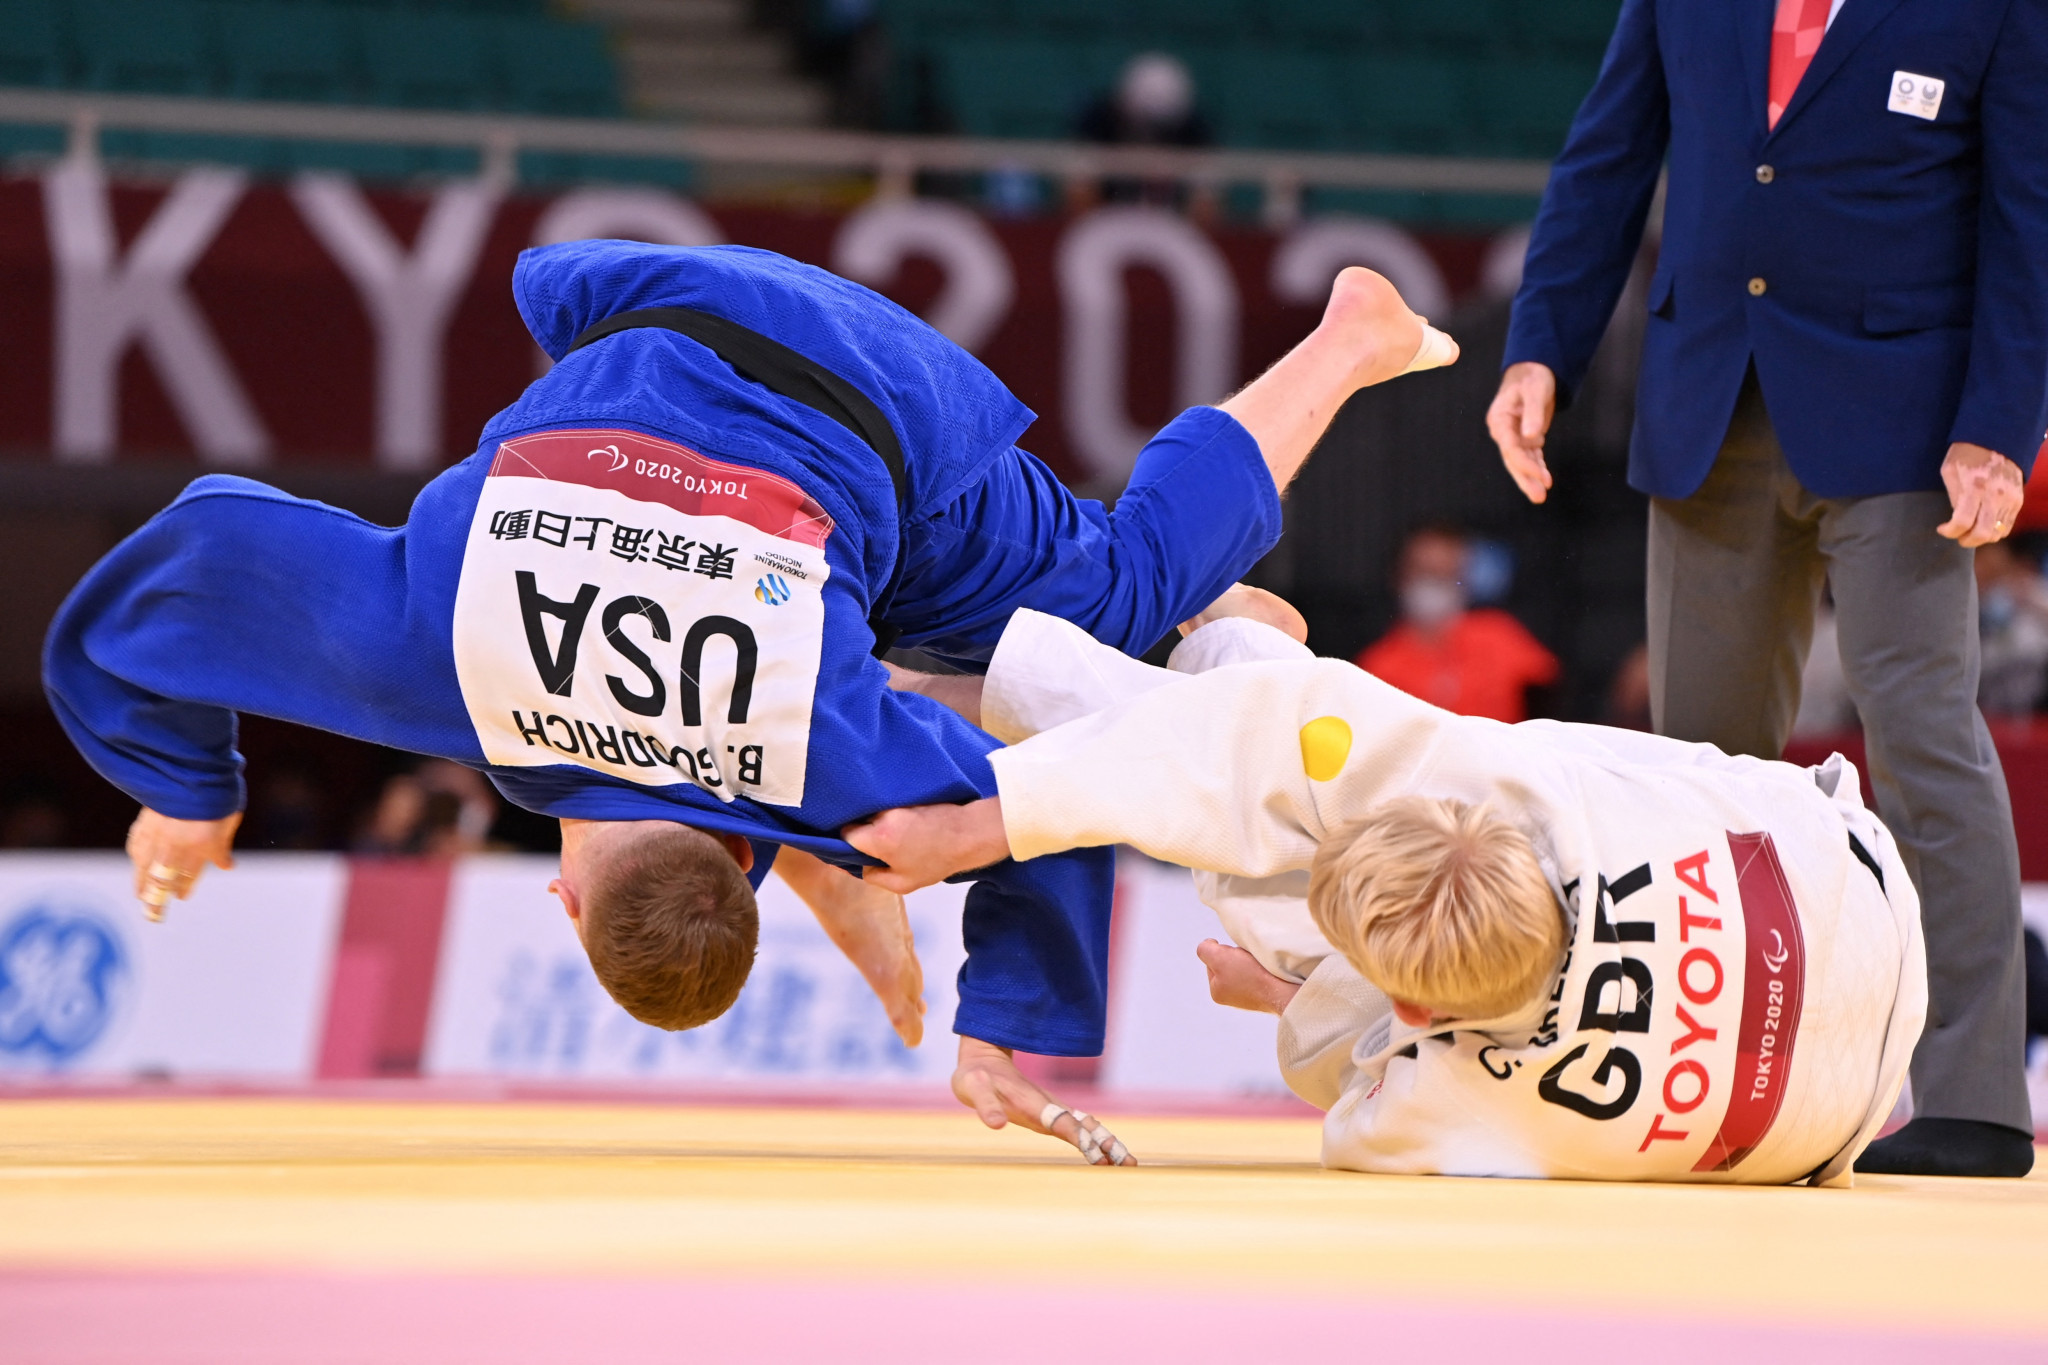 USA Judo and France Judo have formed a partnership as part of Paris 2024 and LA 2028 preparations ©Getty Images